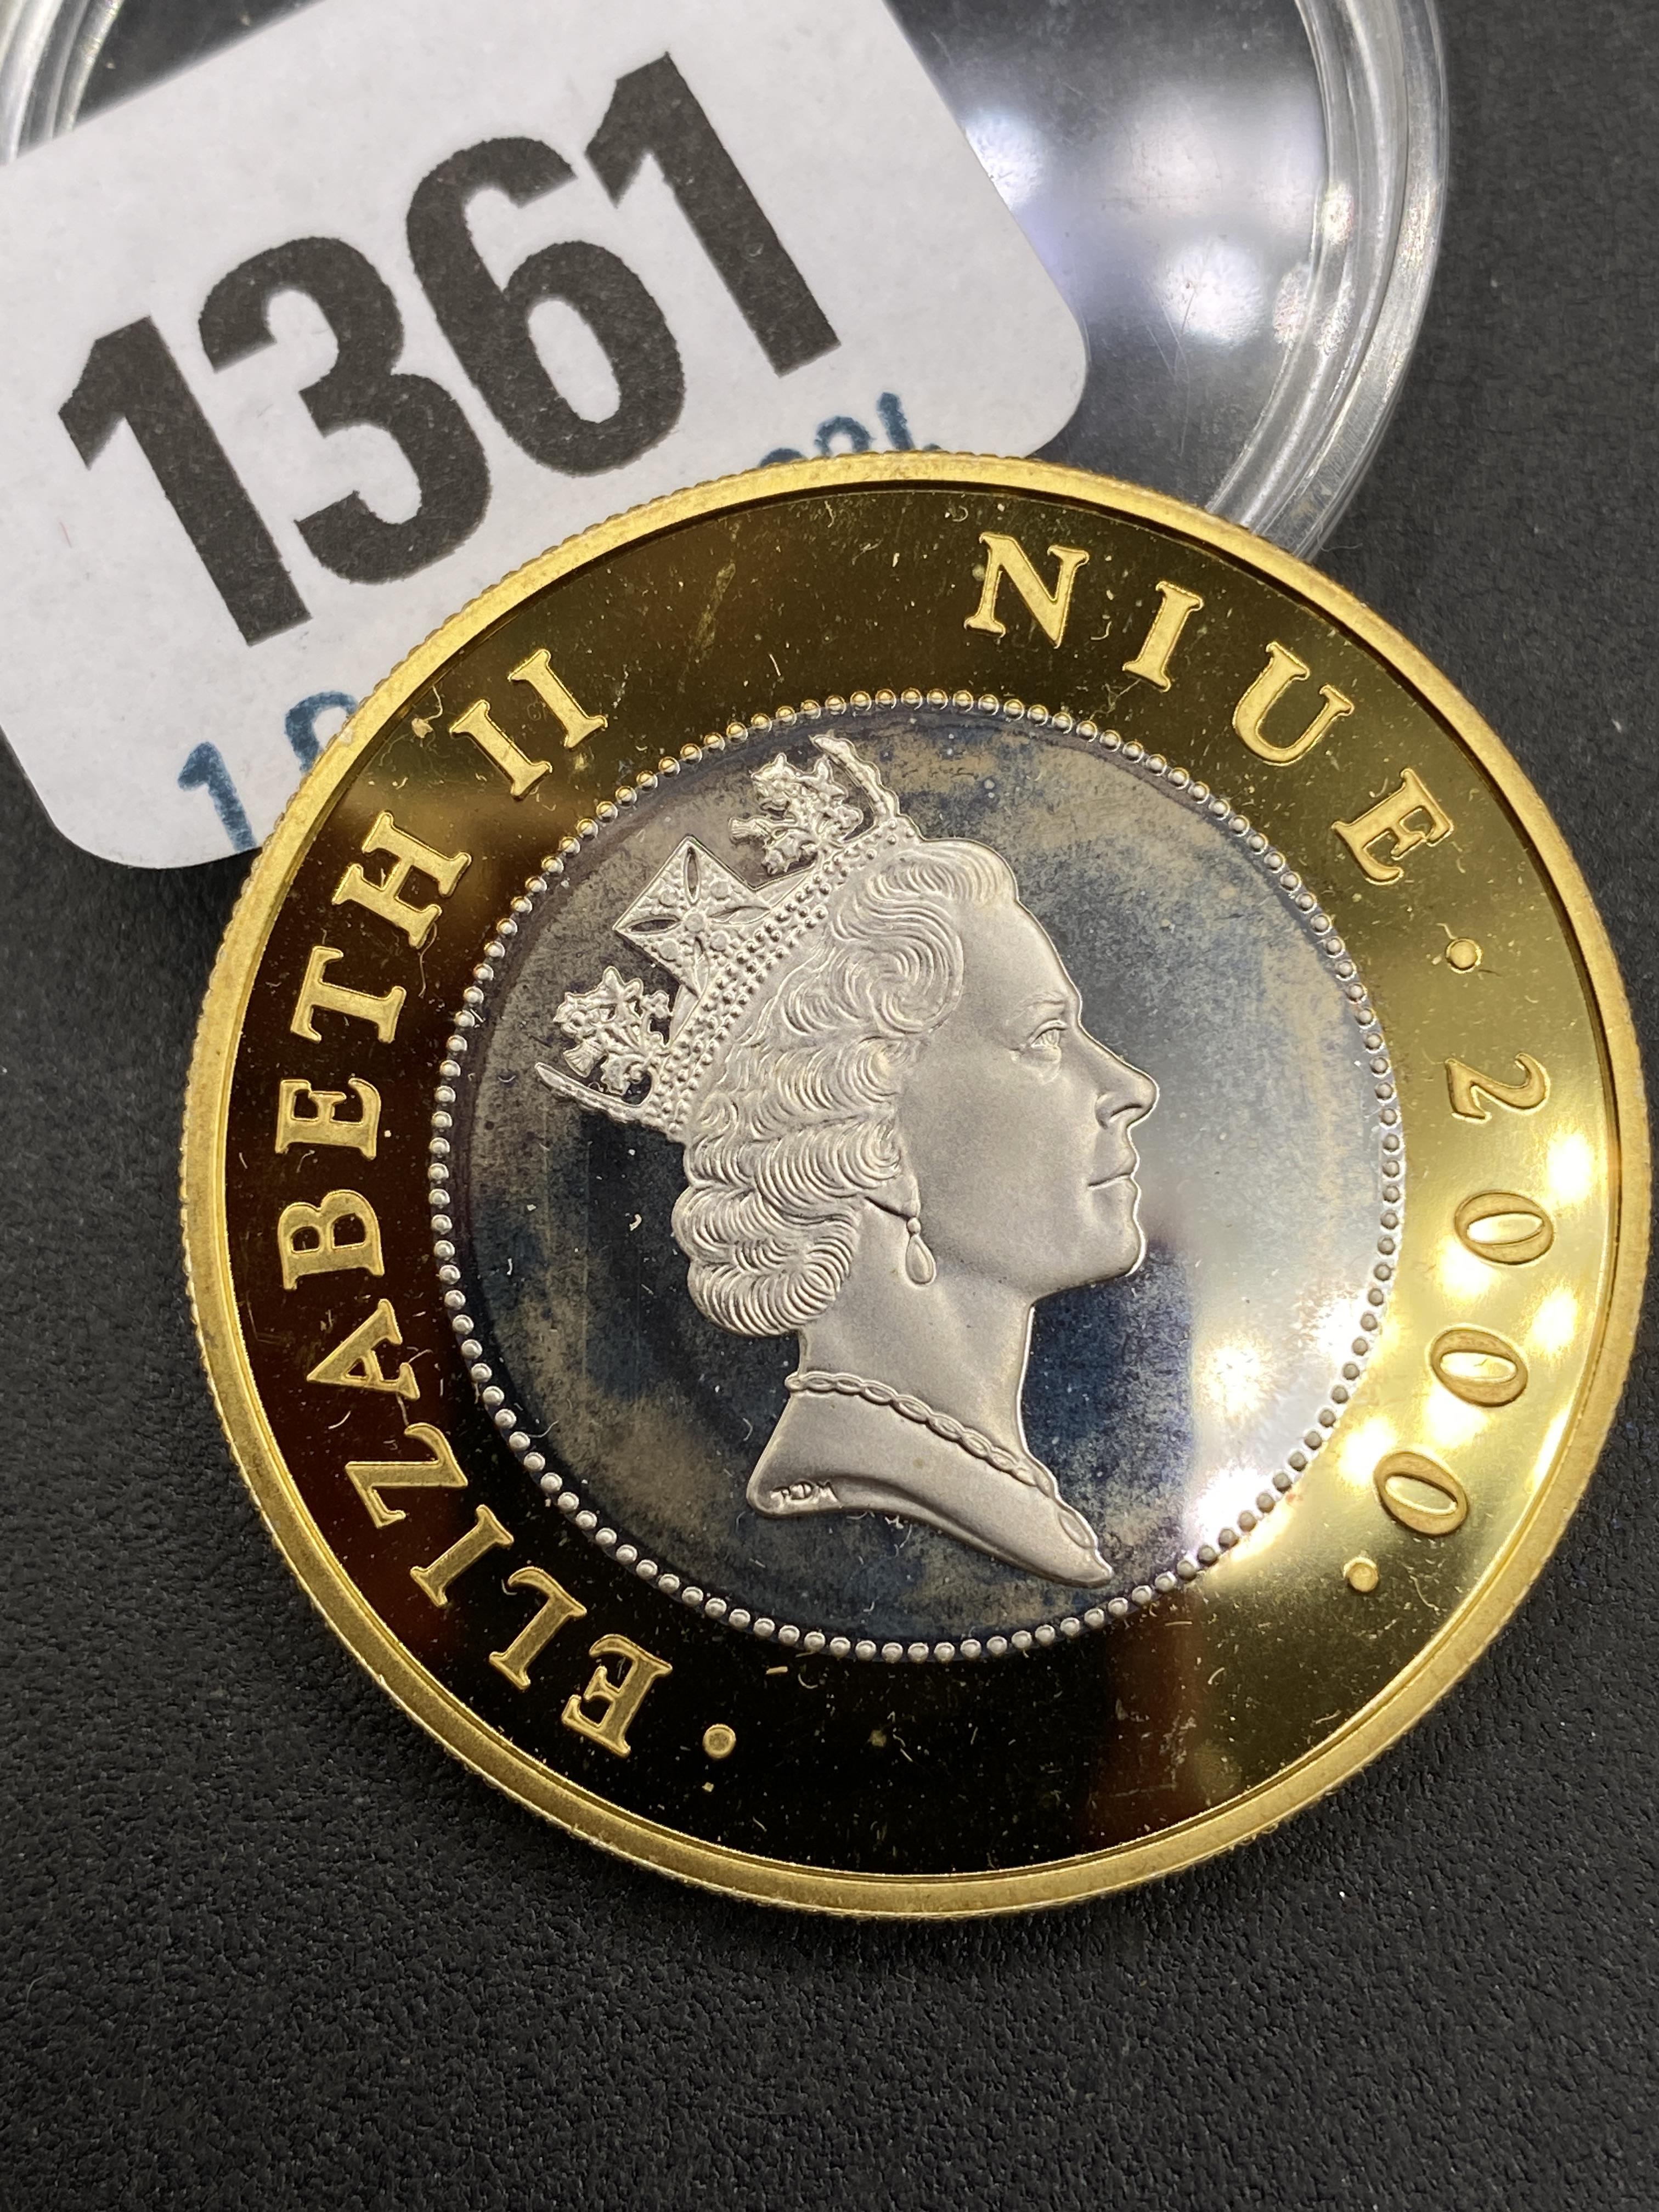 2000 Proof silver .925 nuie $5 coin Qu Mother - Image 2 of 2